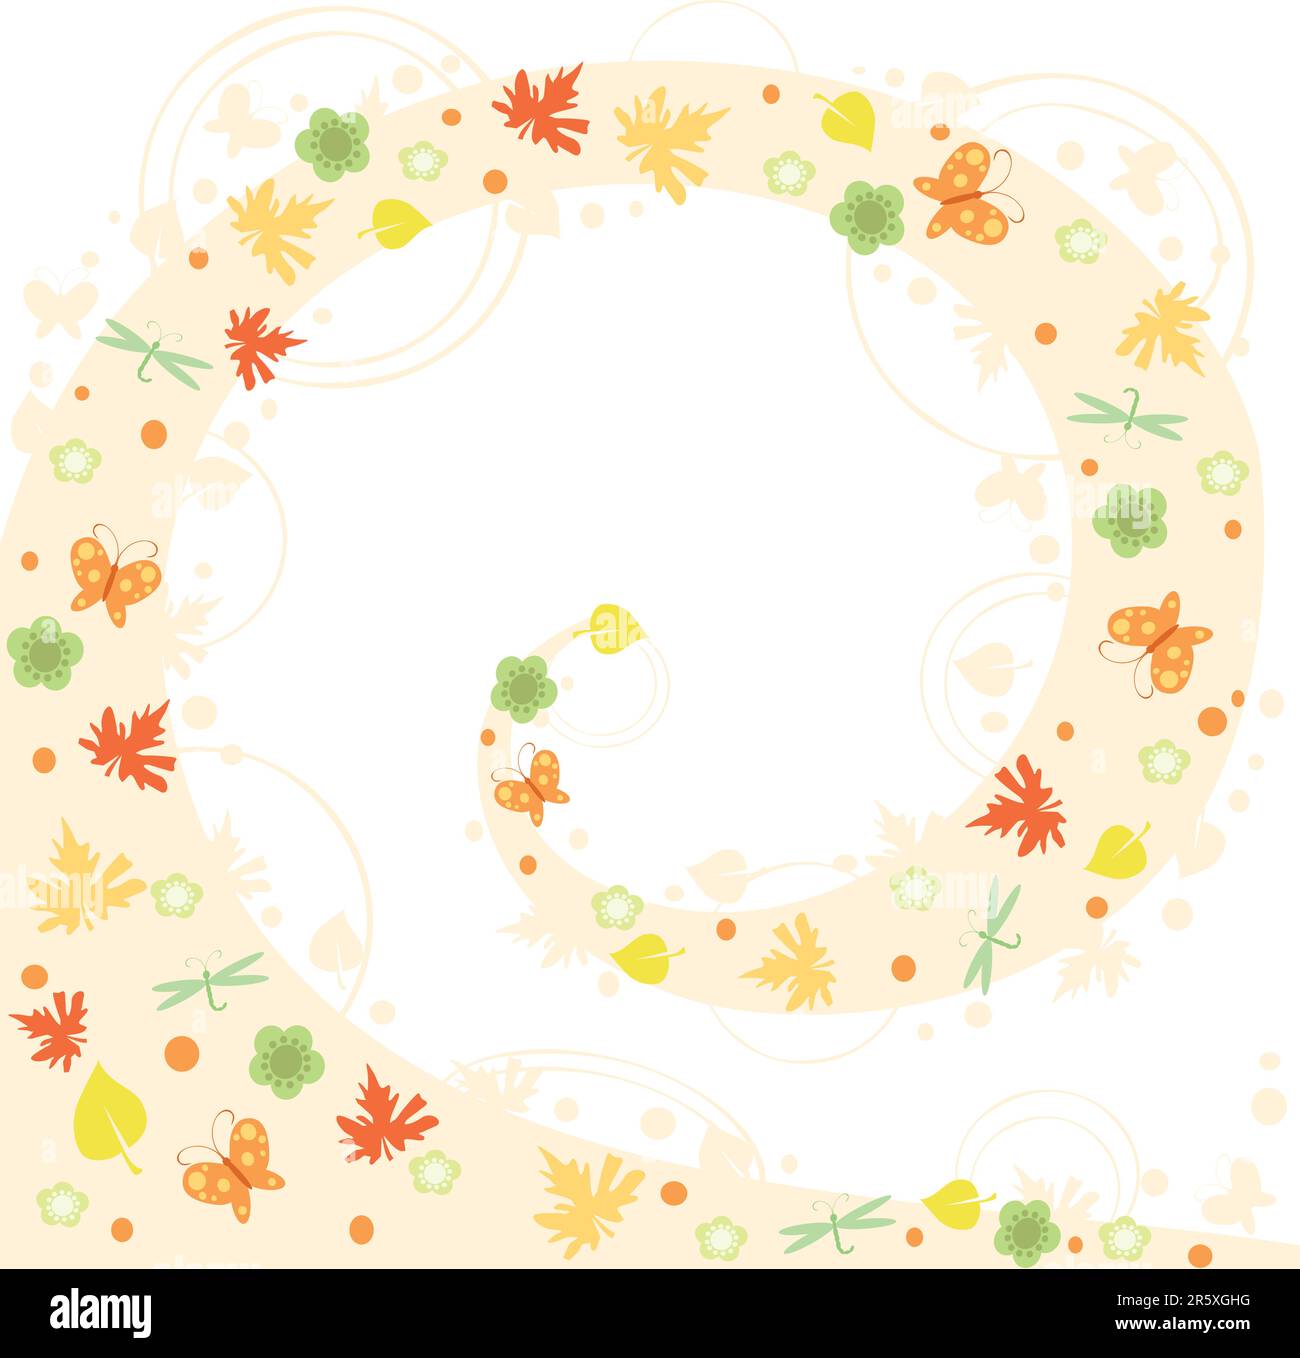 vignette with yellow leaves and butterfly Stock Vector